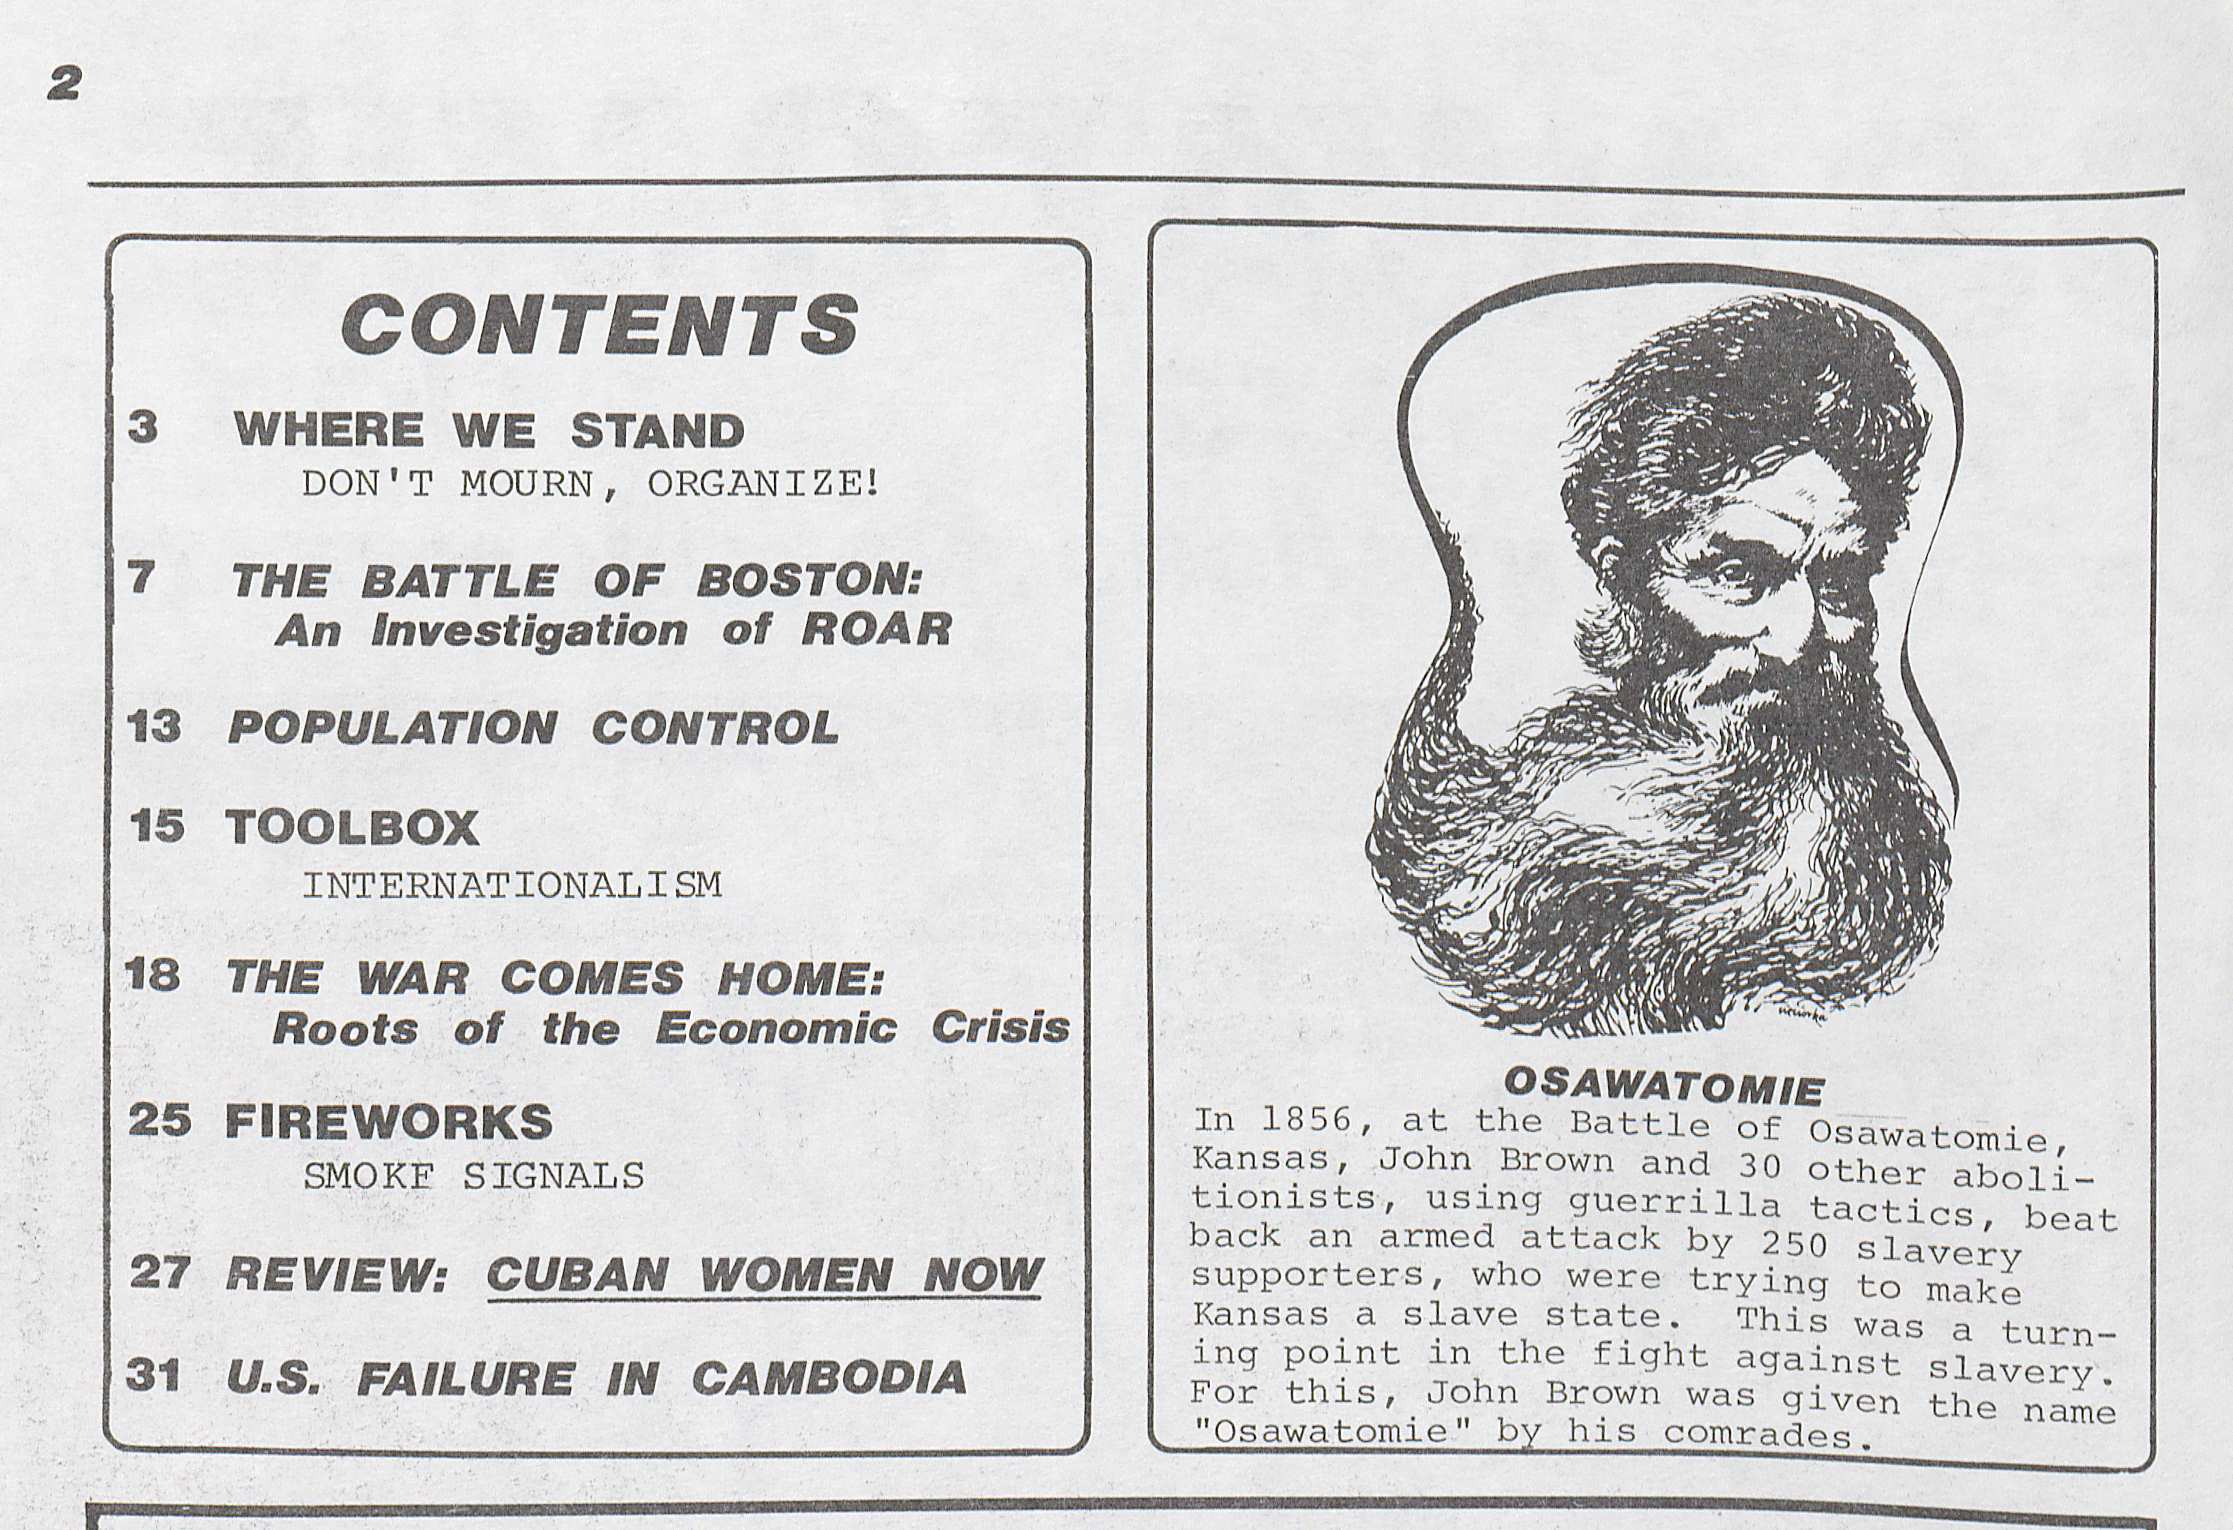 Table of Contents of The Weather Underground Organization's magazine Osawatomie, no. 1, 1975.